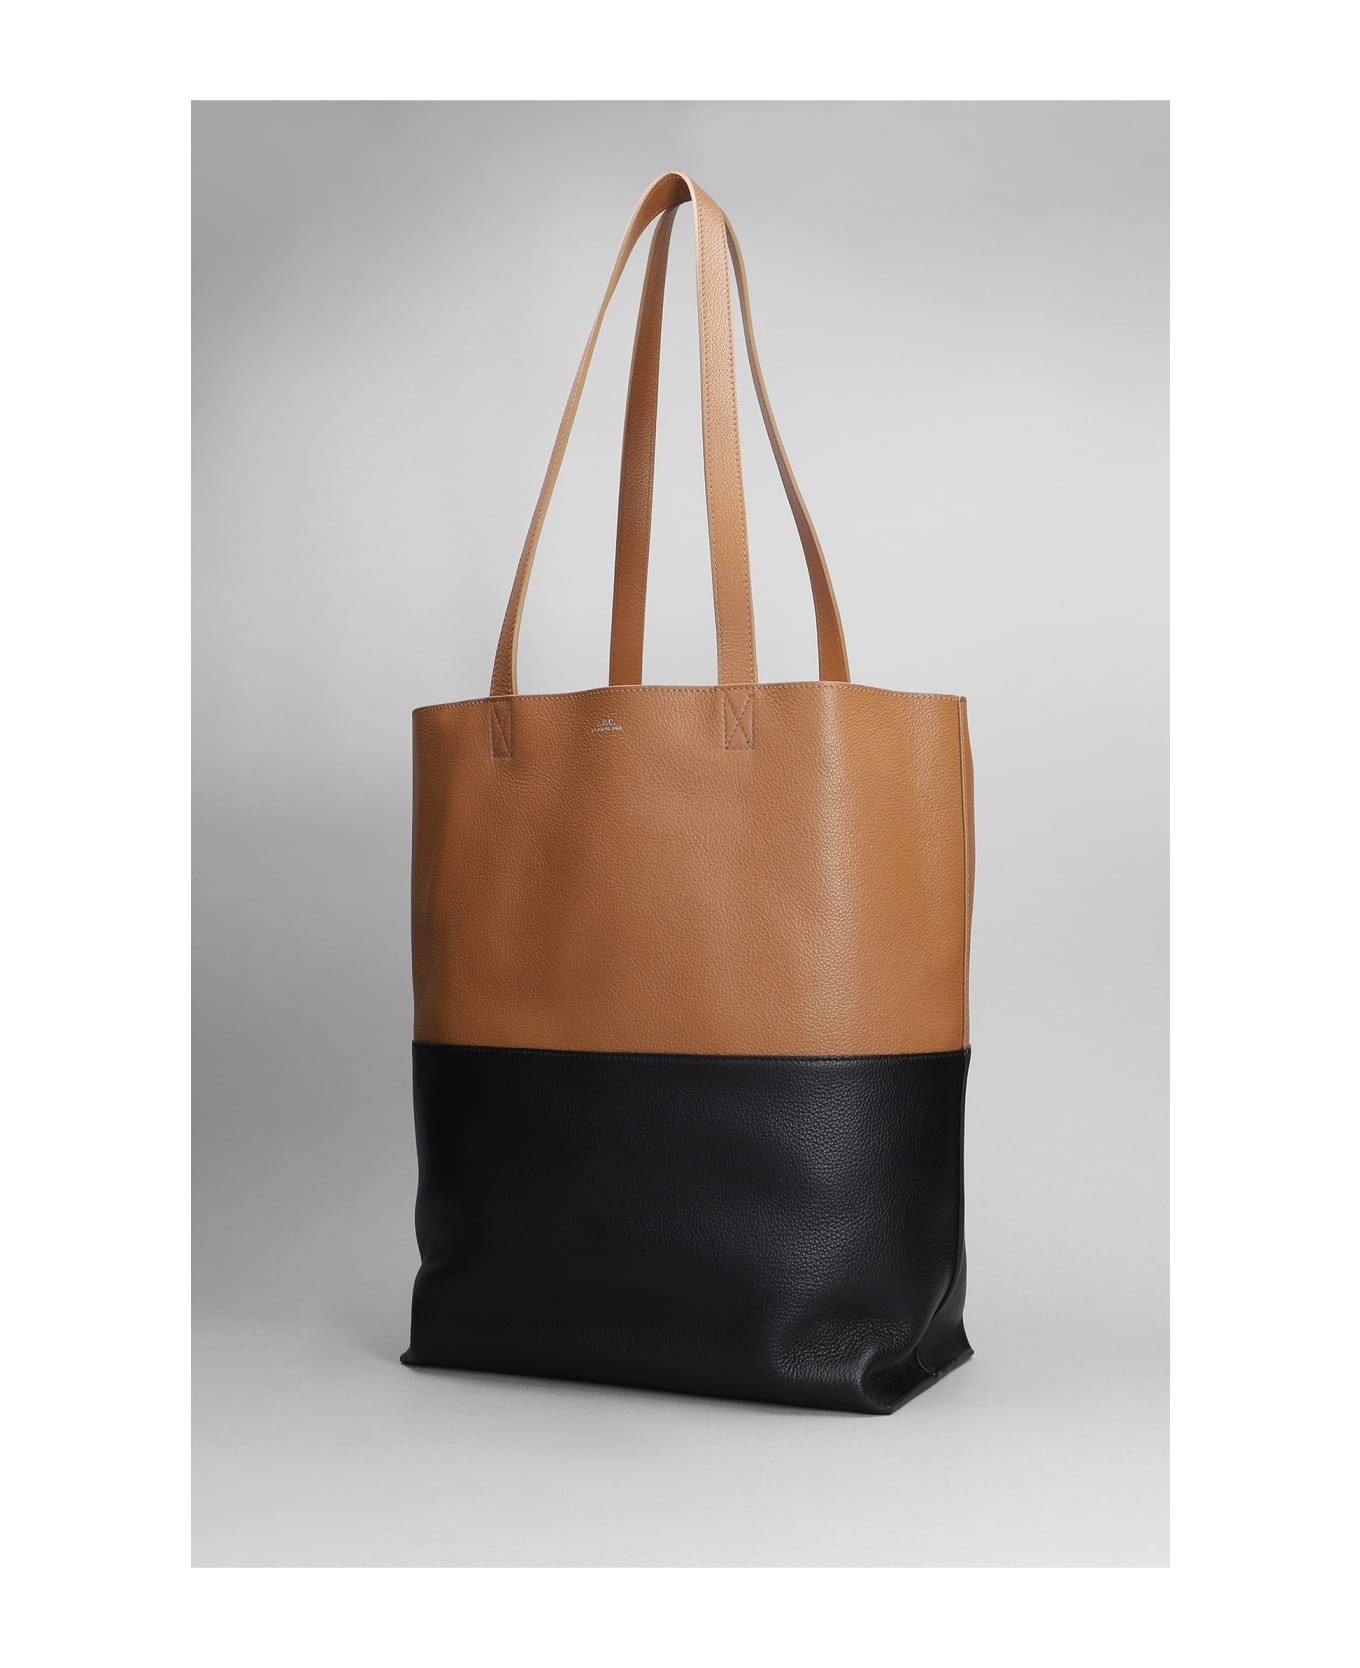 A.P.C. Maiko Bicolore Tote In Brown Leather - brown トートバッグ